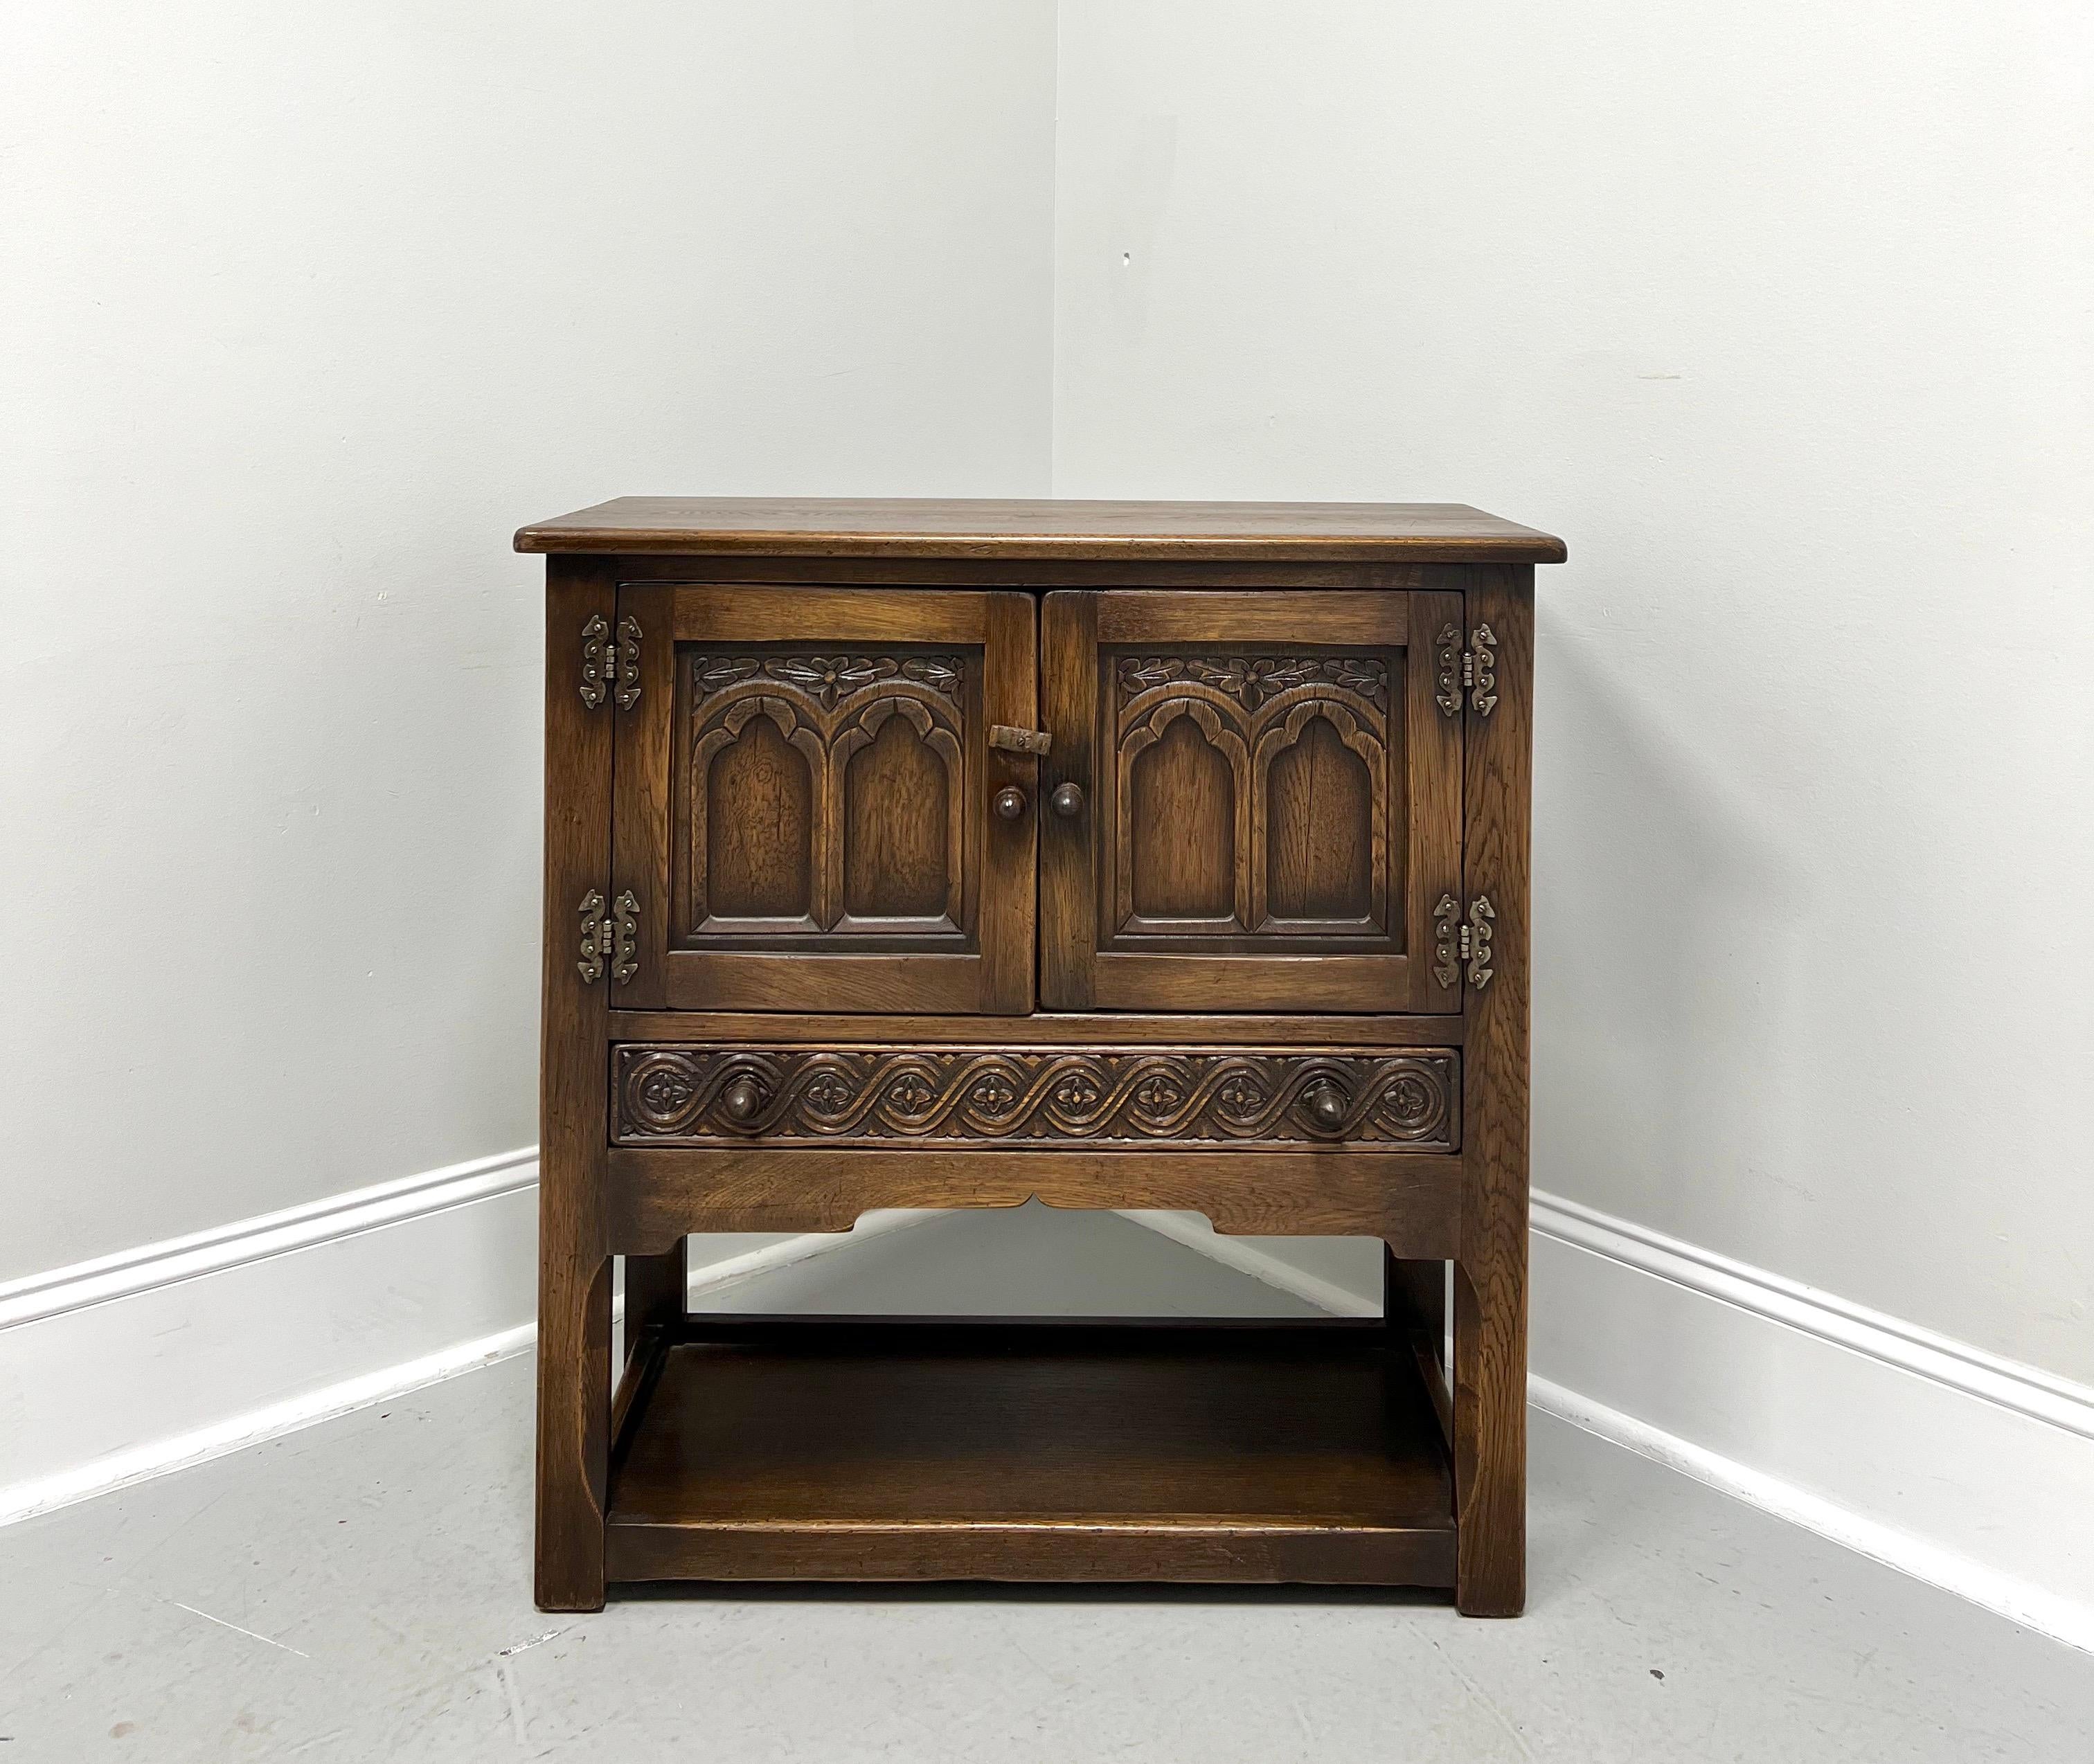 A Jacobean style console cabinet, unbranded. Solid oak with brass hinge hardware, bullnose edge to the top, decoratively carved door & drawer fronts with wood knobs, carved apron, open undertier floor level shelf, and carved straight legs. Features